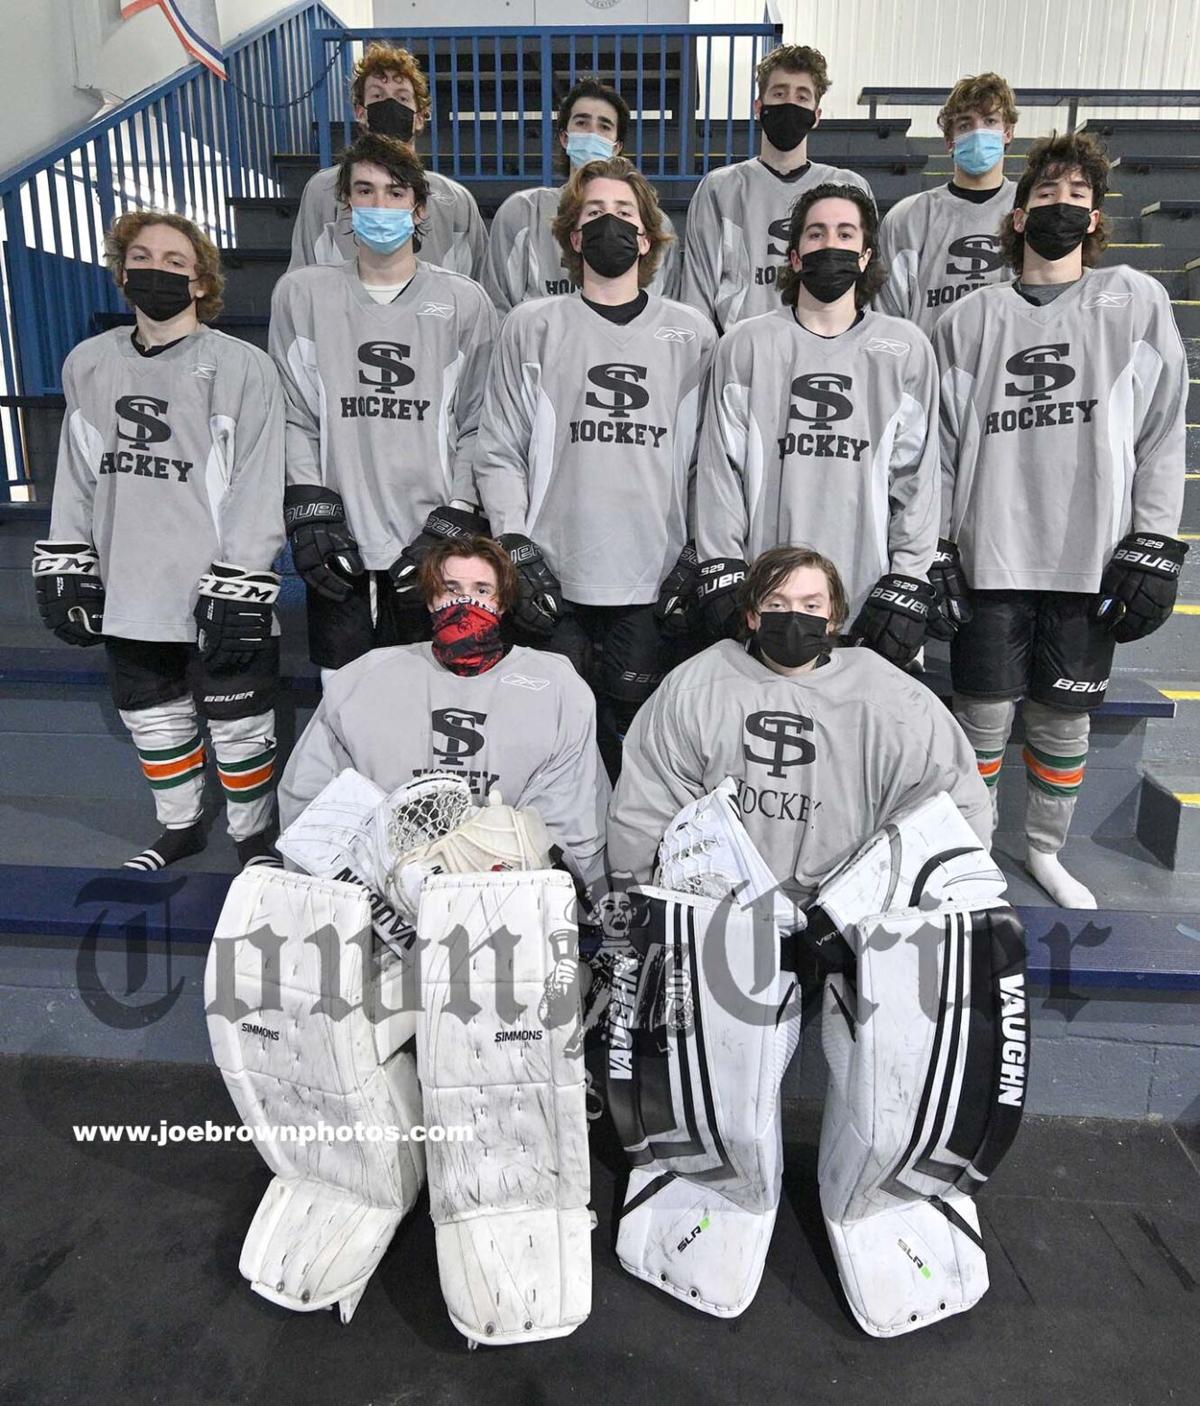 The Shawsheen Tech Boys Hockey team has 11 local players from Wilmington